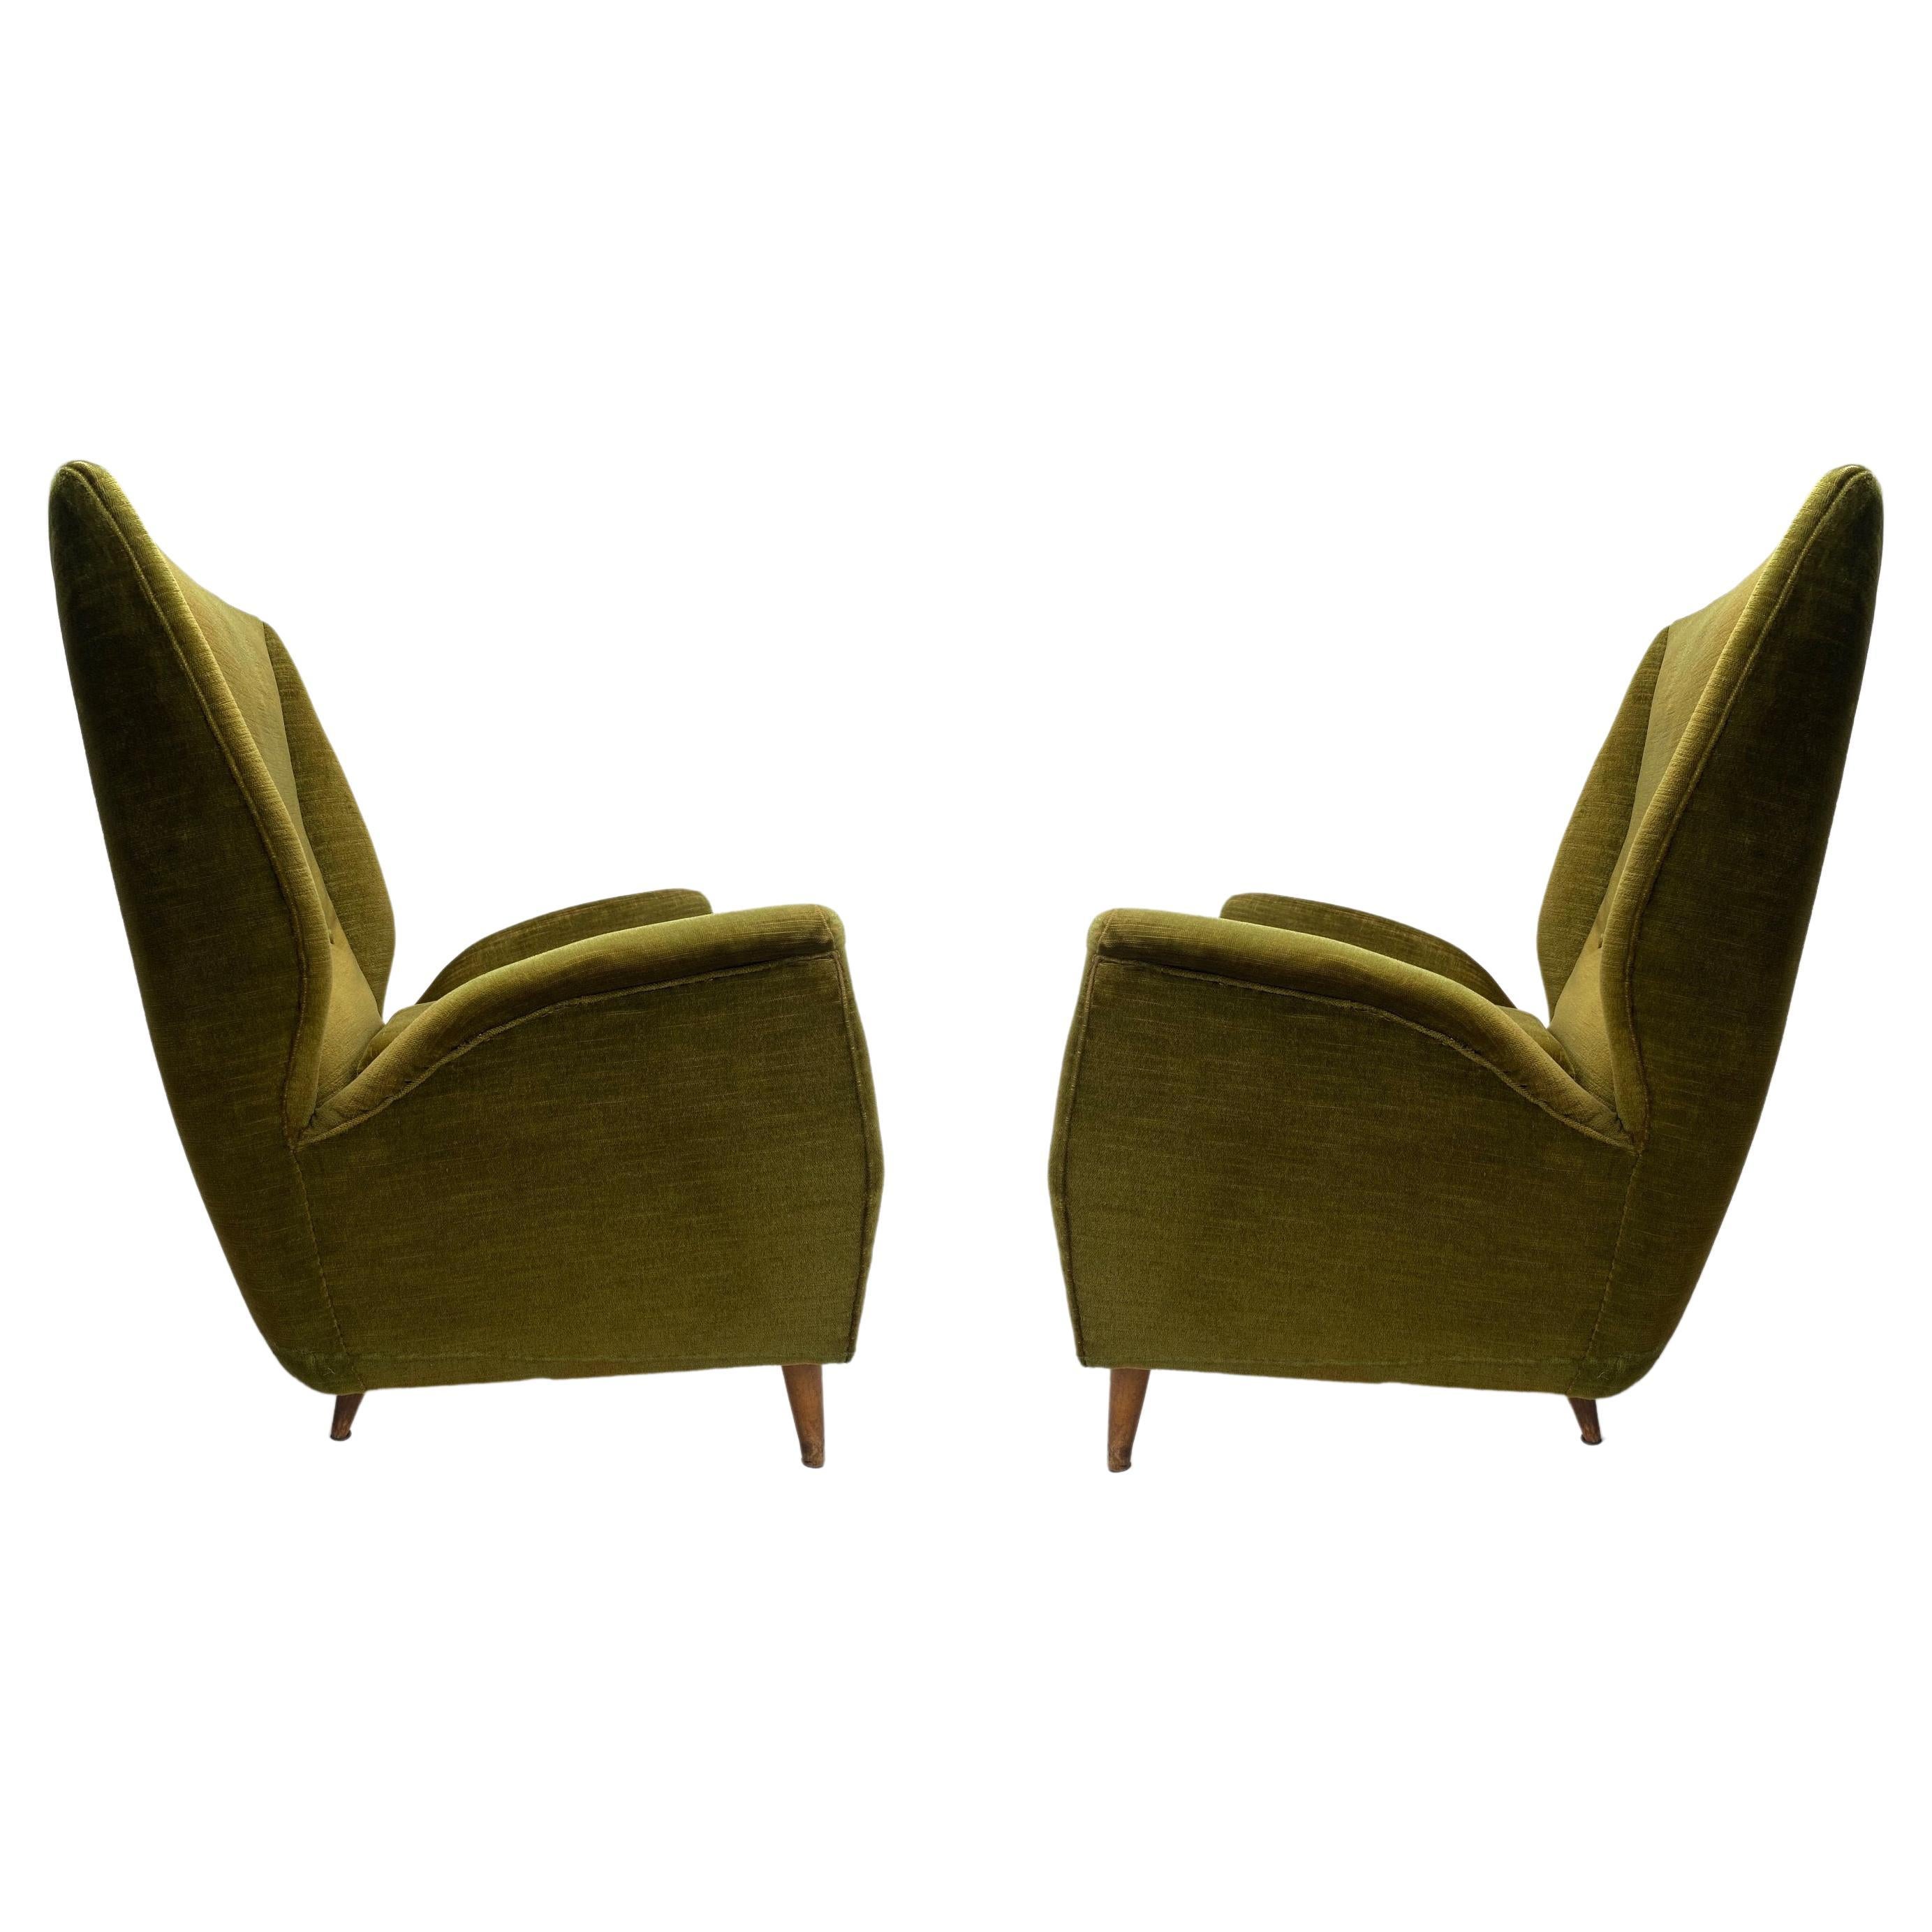 Gio Ponti, rare pair of Wingback Armchairs for ISA, Italy, 1950s (customizable) For Sale